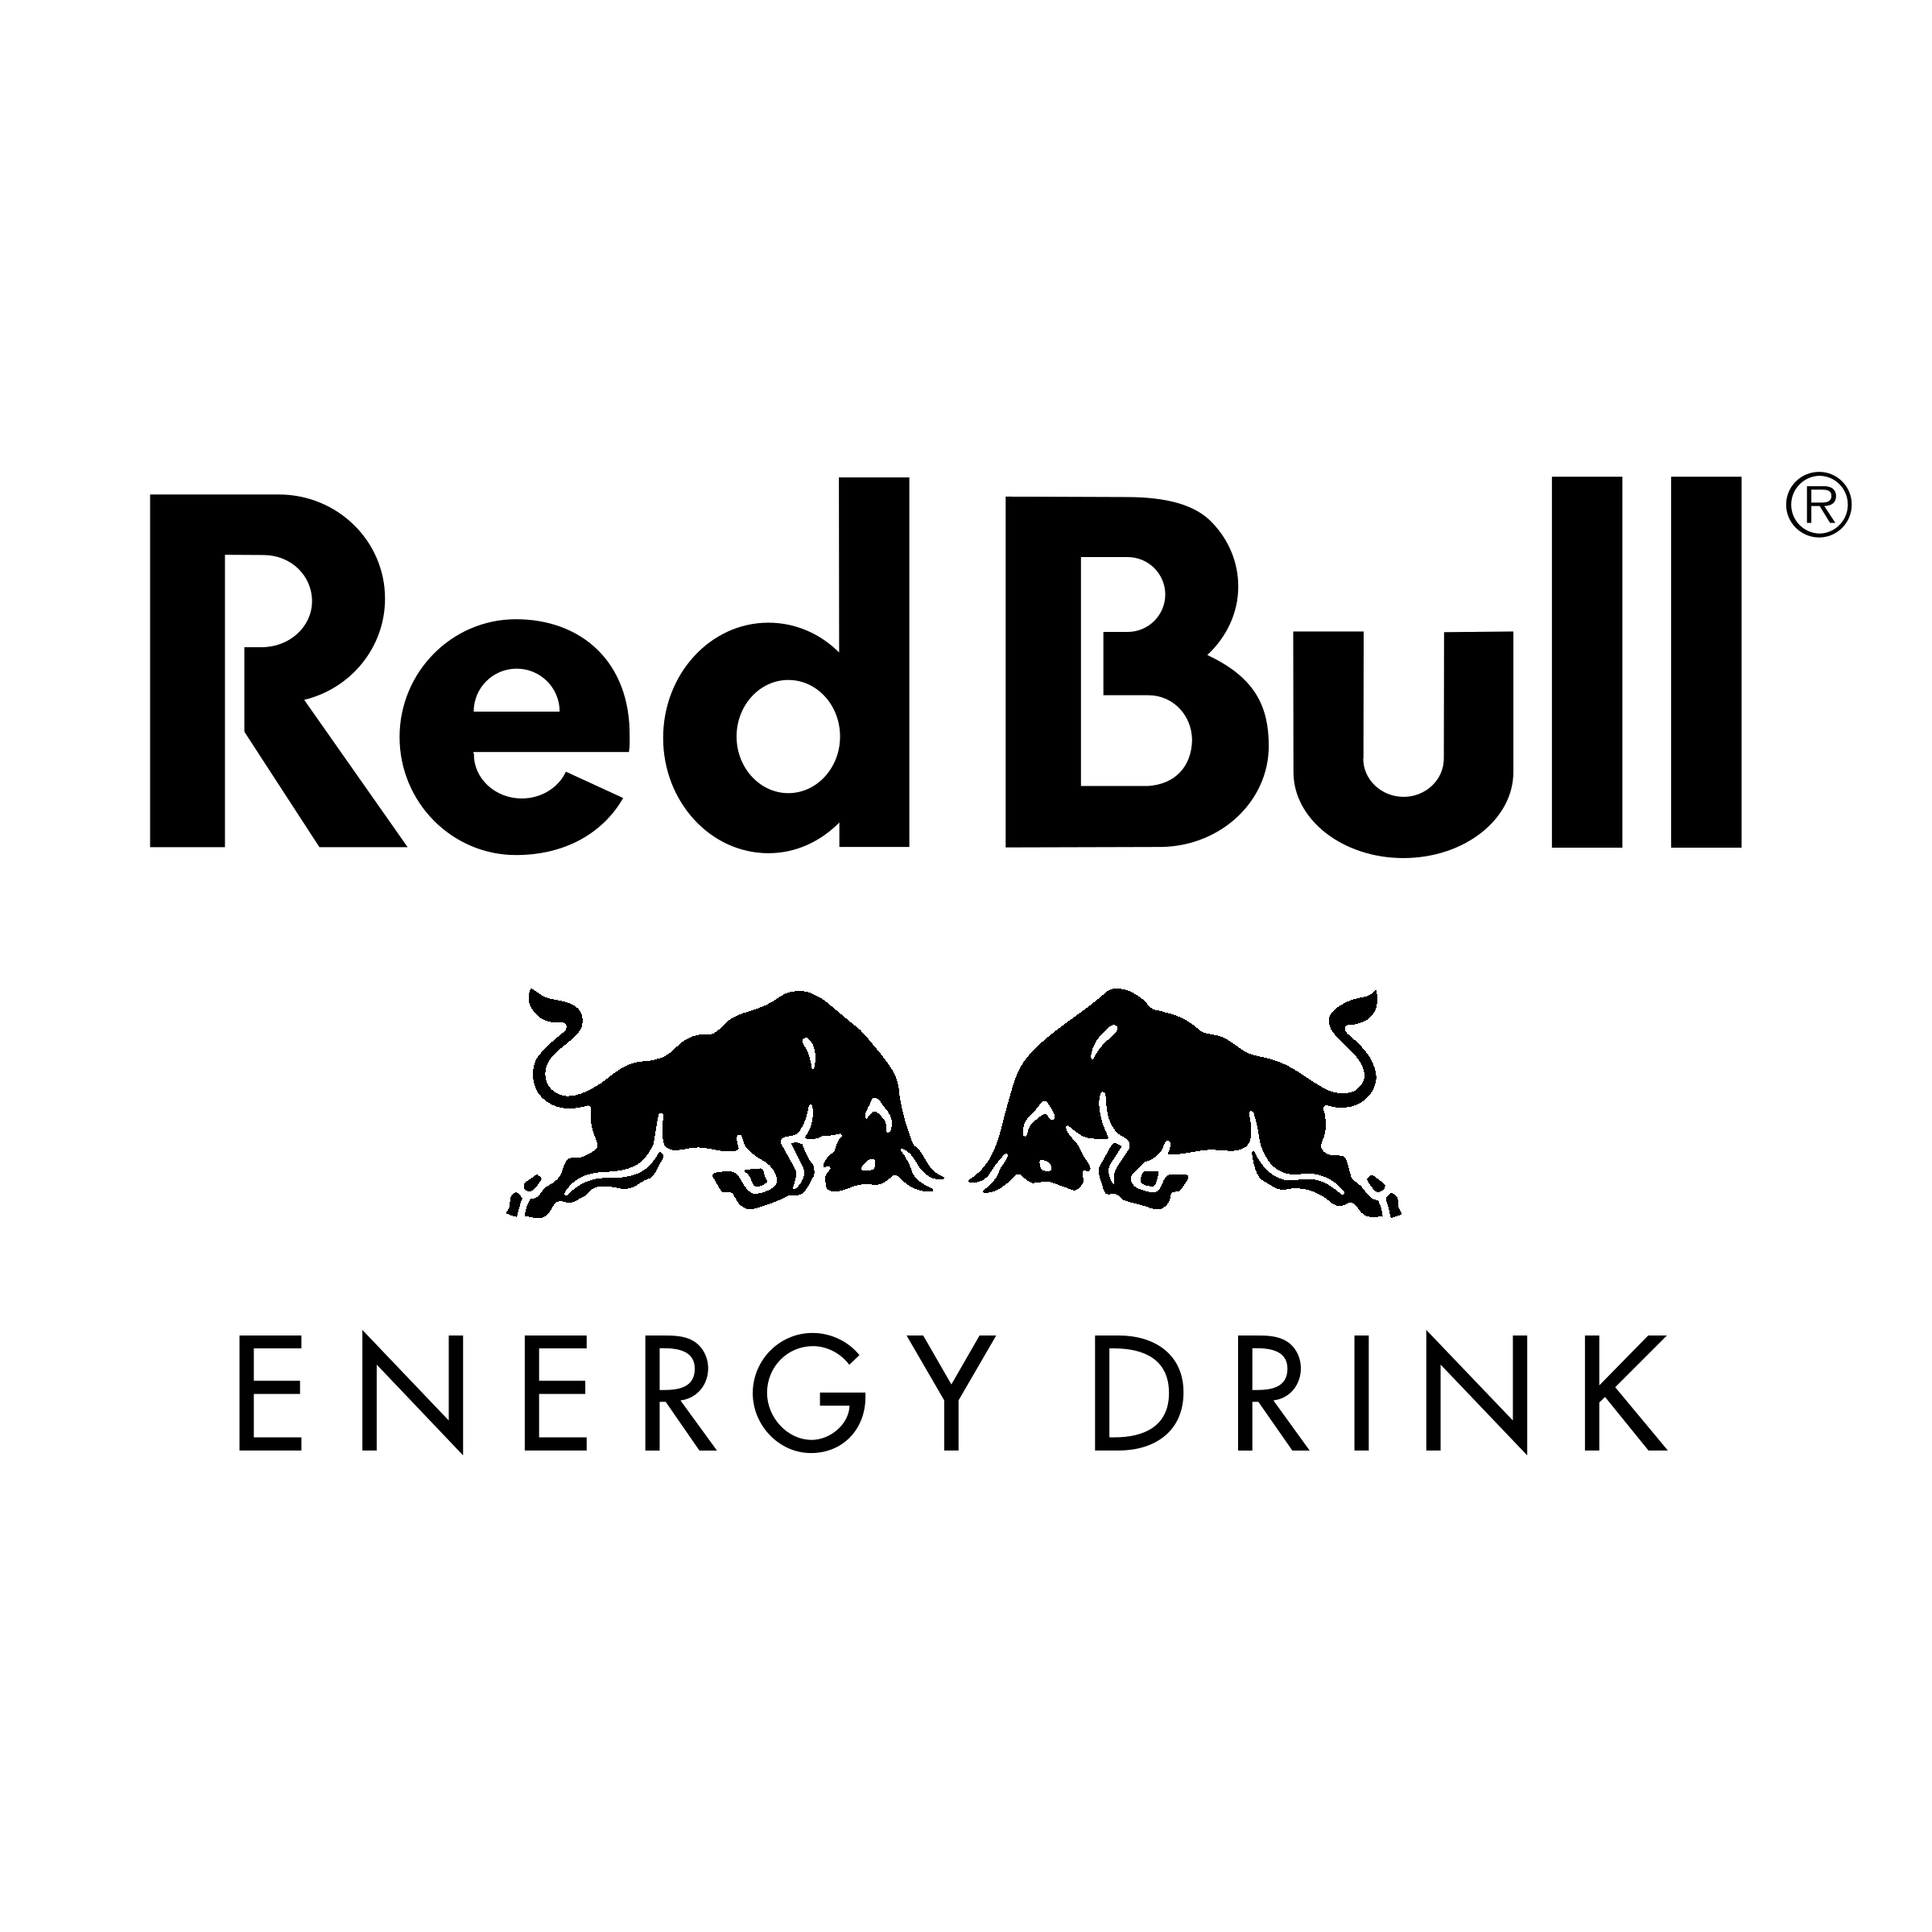 Red and Black Bull Logo - Red Bull Logo PNG Transparent & SVG Vector - Freebie Supply